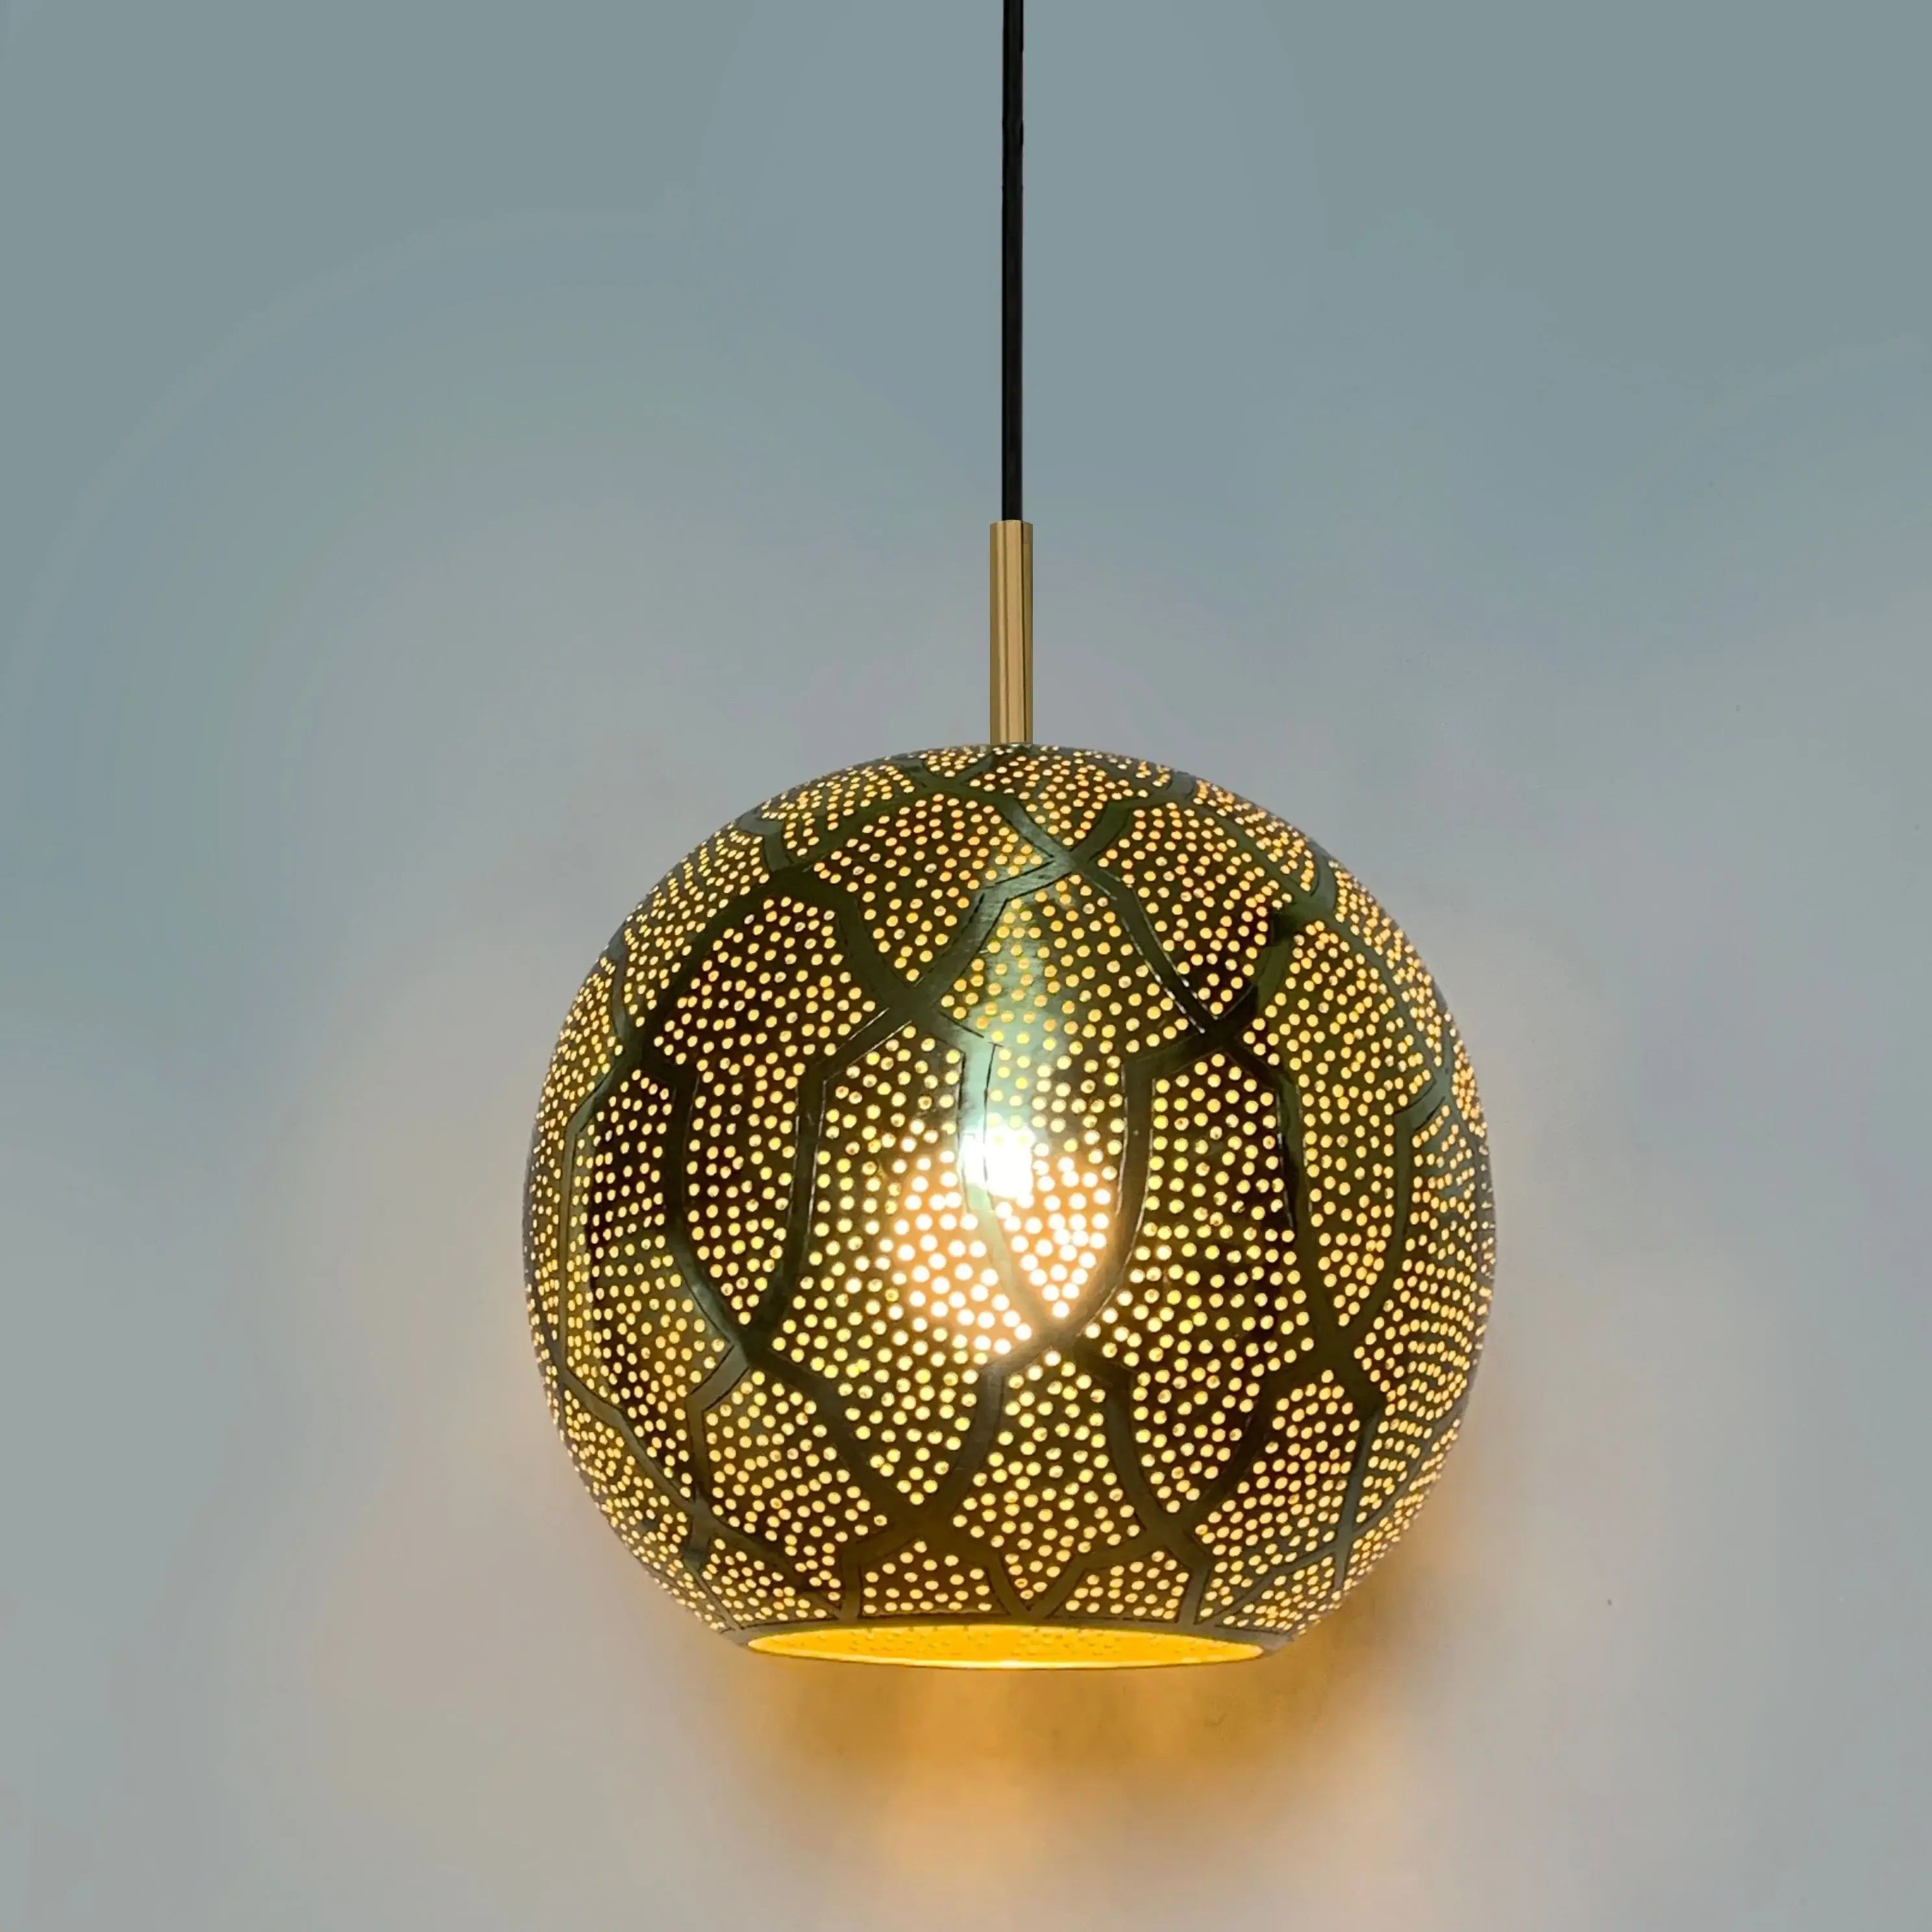 Dounia home Chandelier in polished brass made of Metal, Model: Ari